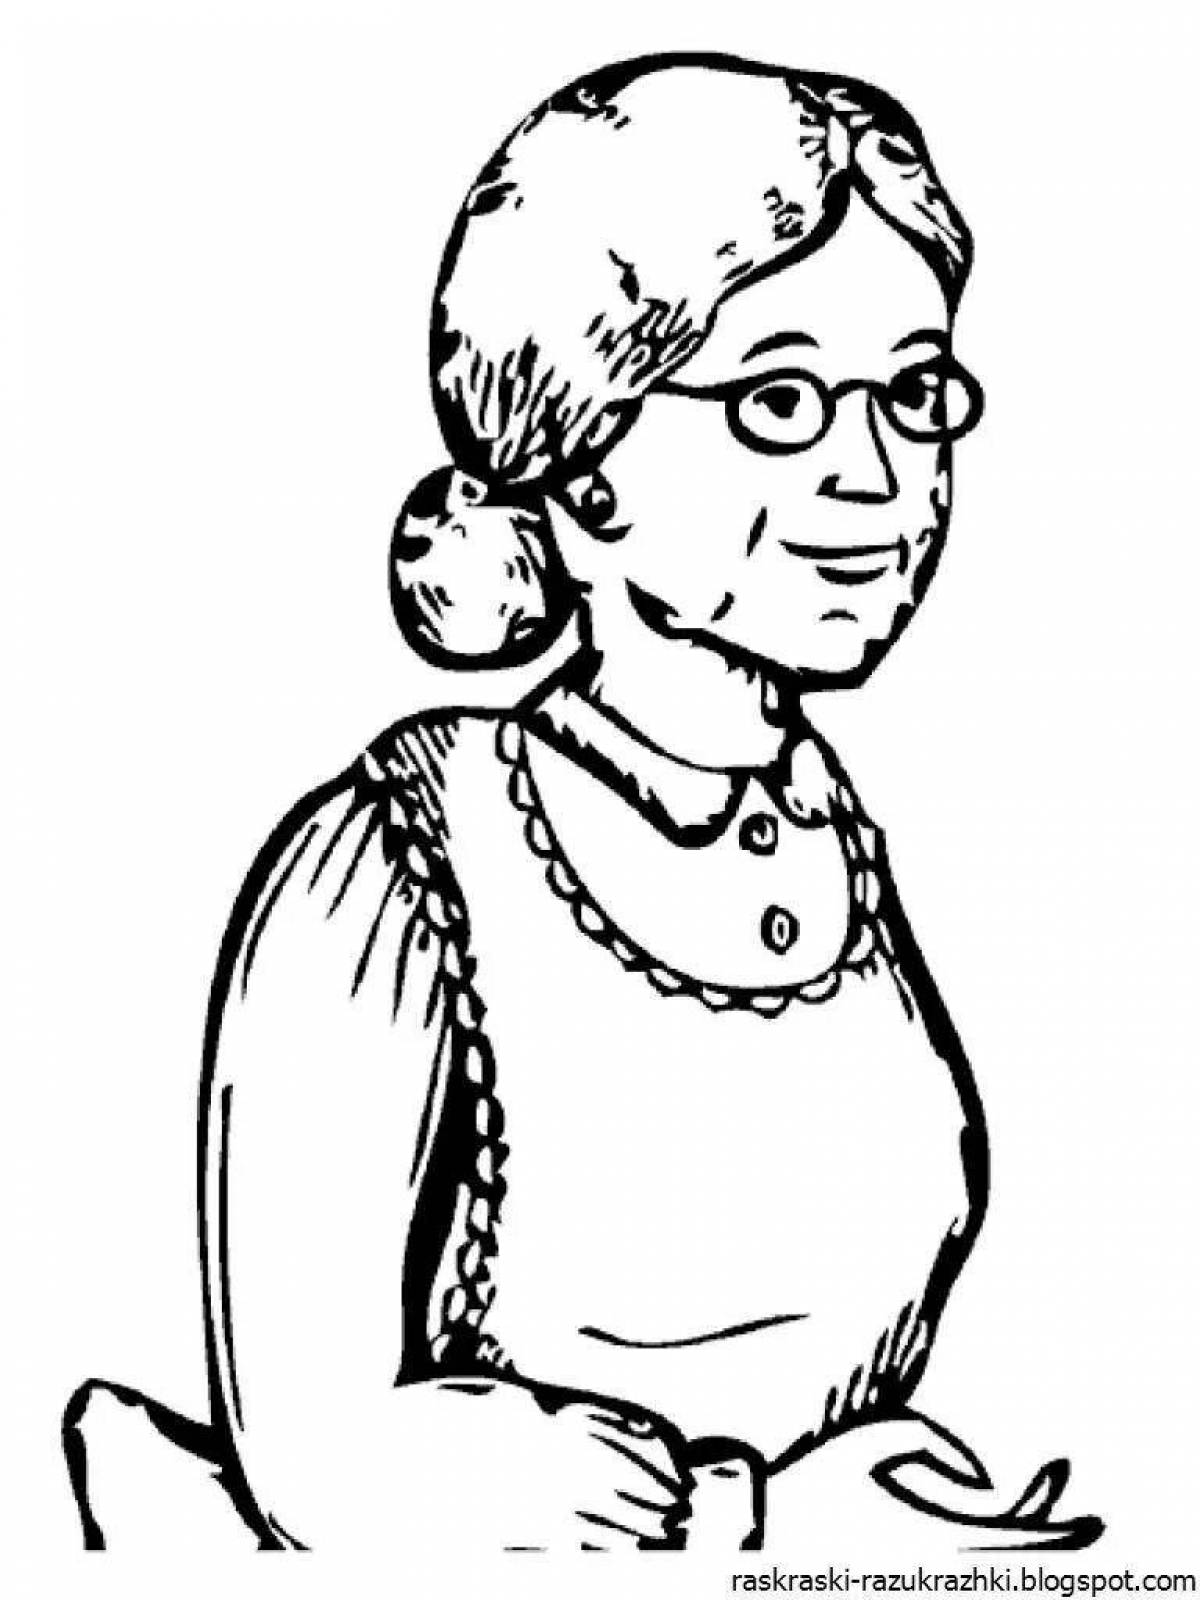 Playful grandmother coloring page